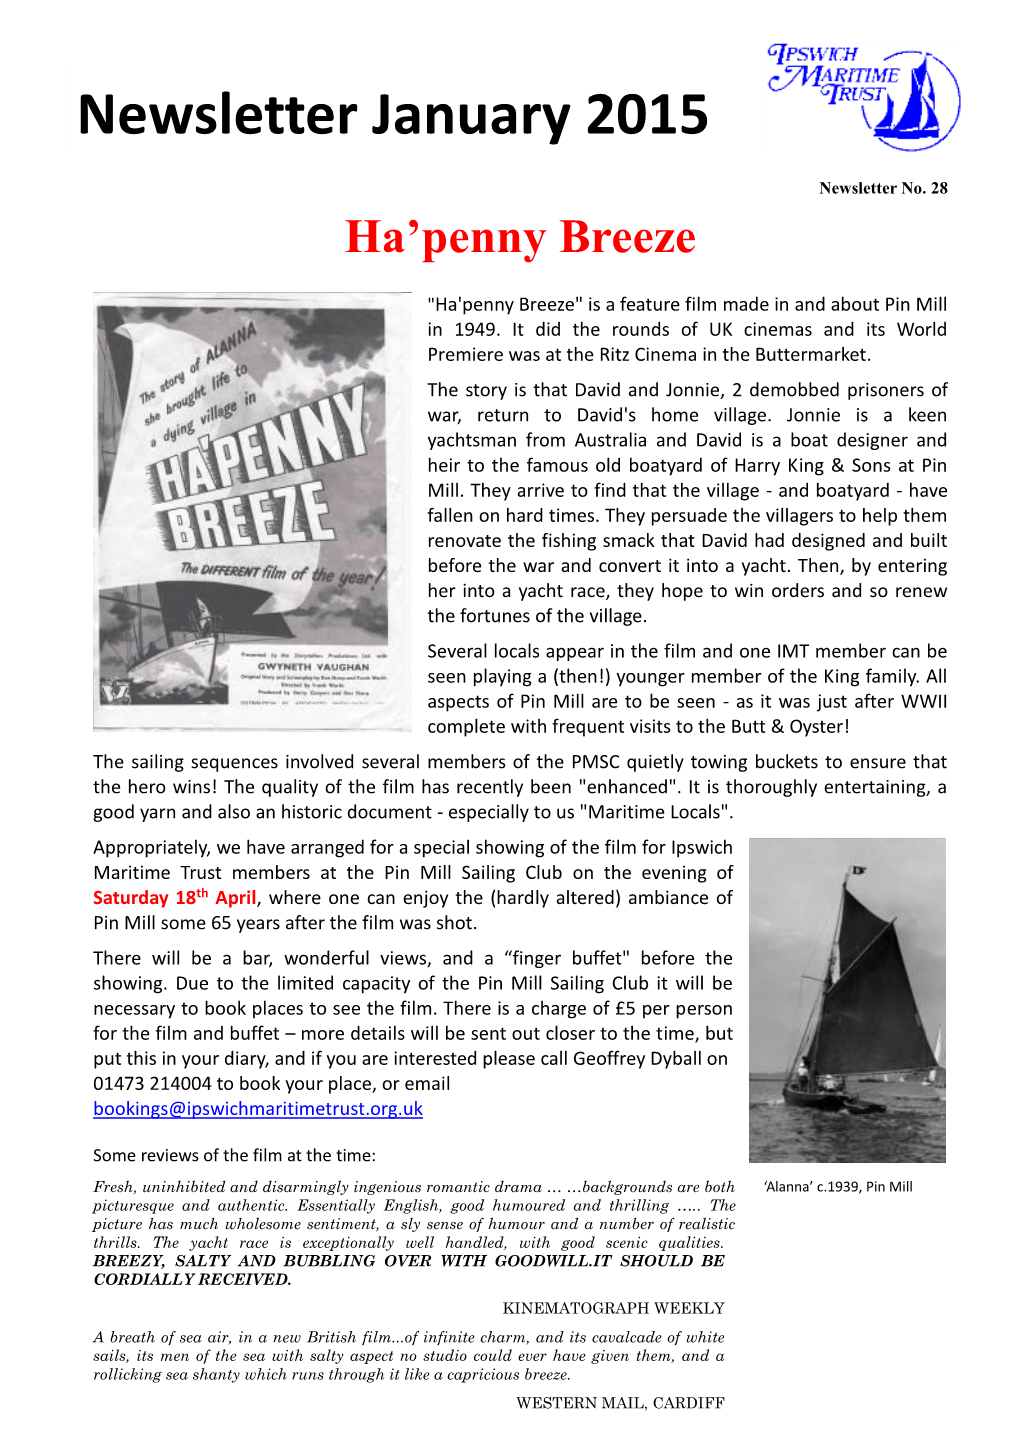 Ha'penny Breeze" Is a Feature Film Made in and About Pin Mill in 1949